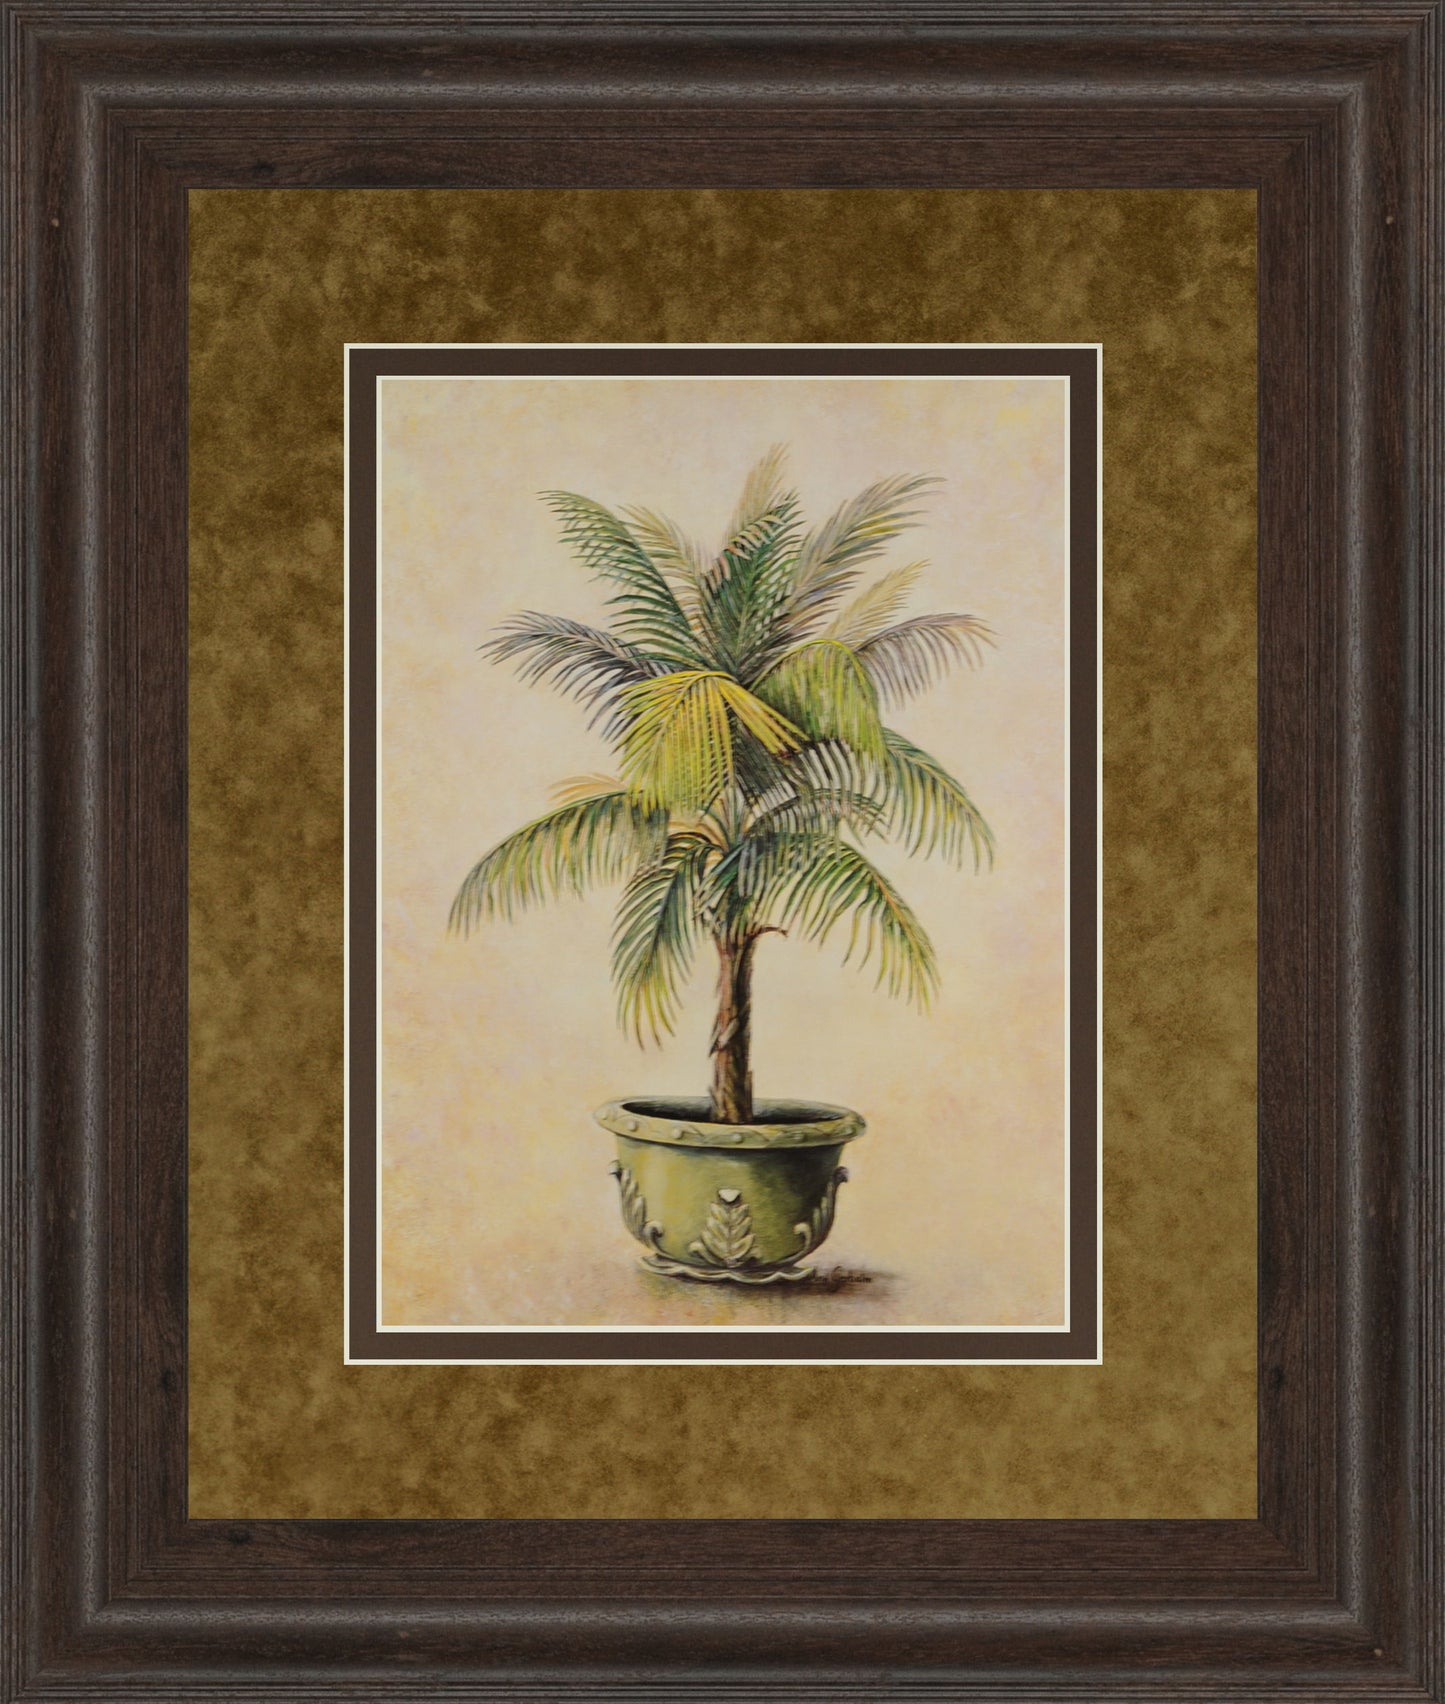 Potted Palm I - Framed Print Wall Art - Green